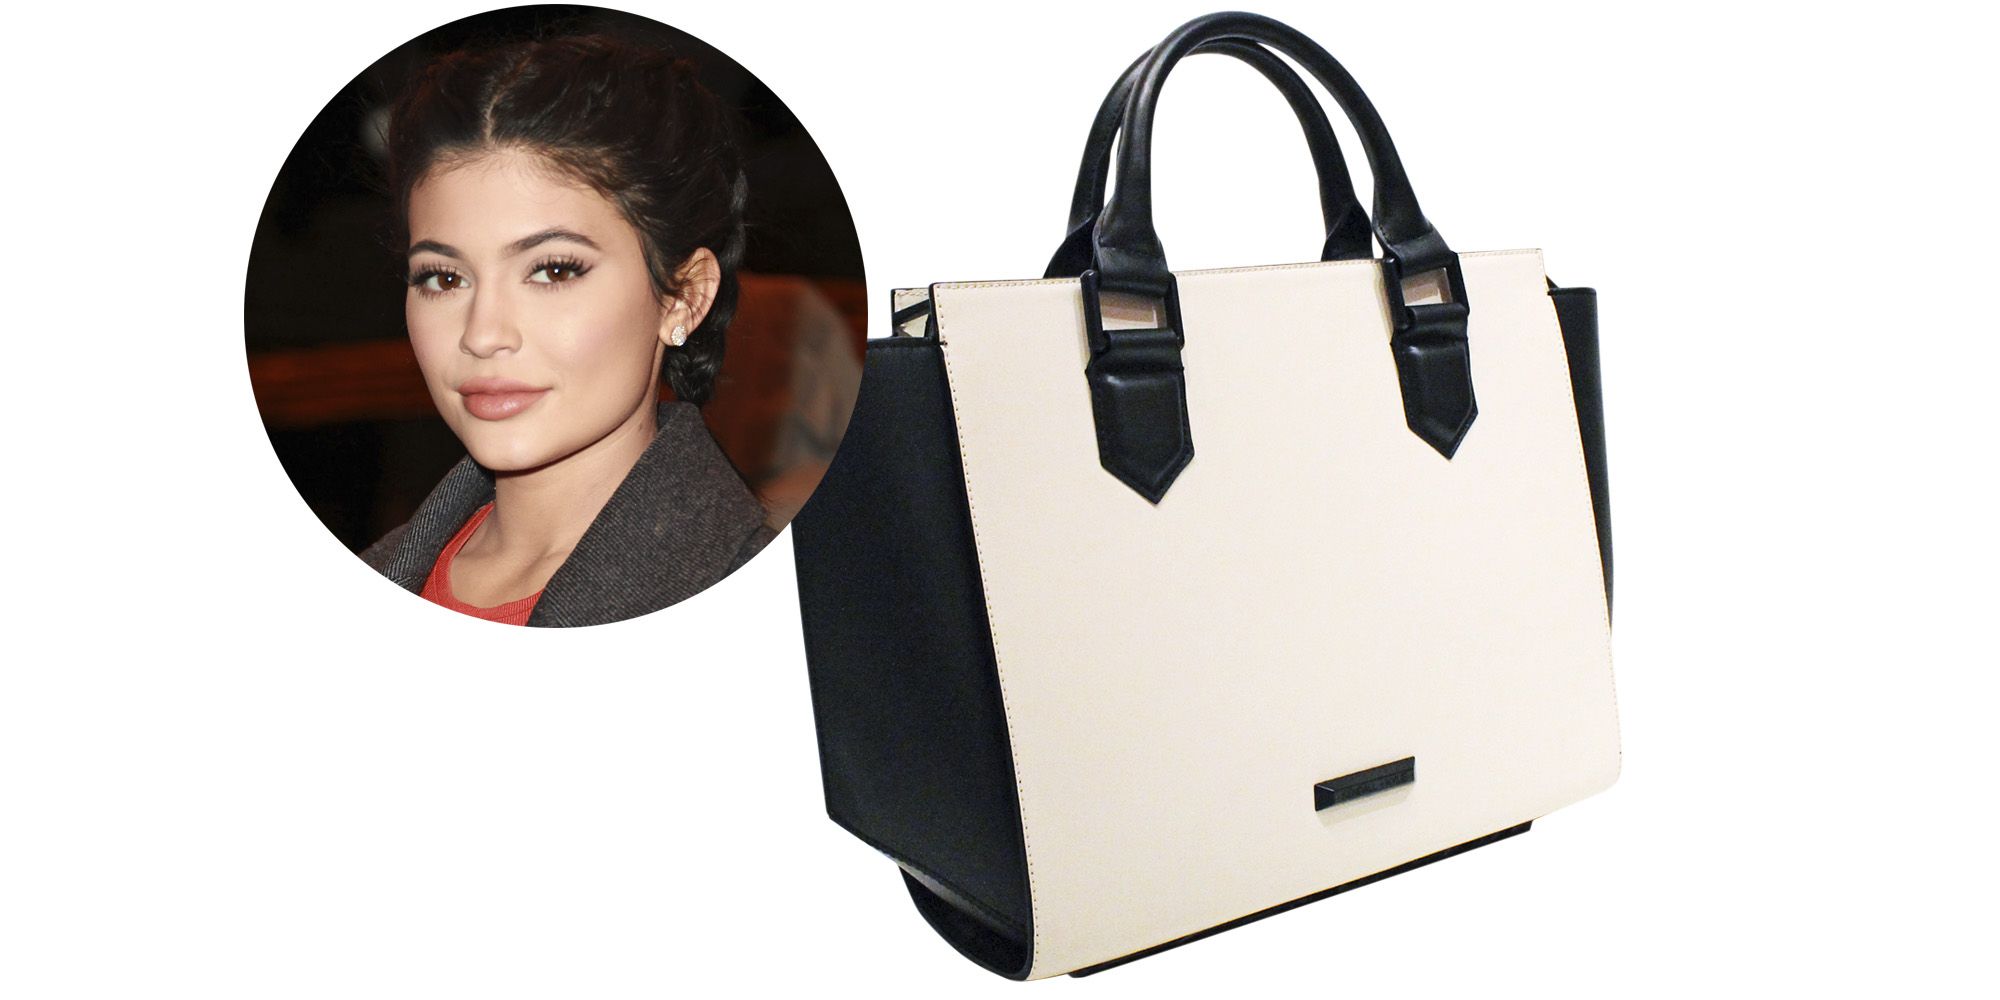 Kylie Jenner Shares Contents of Purse and Reveals Secret Hobby